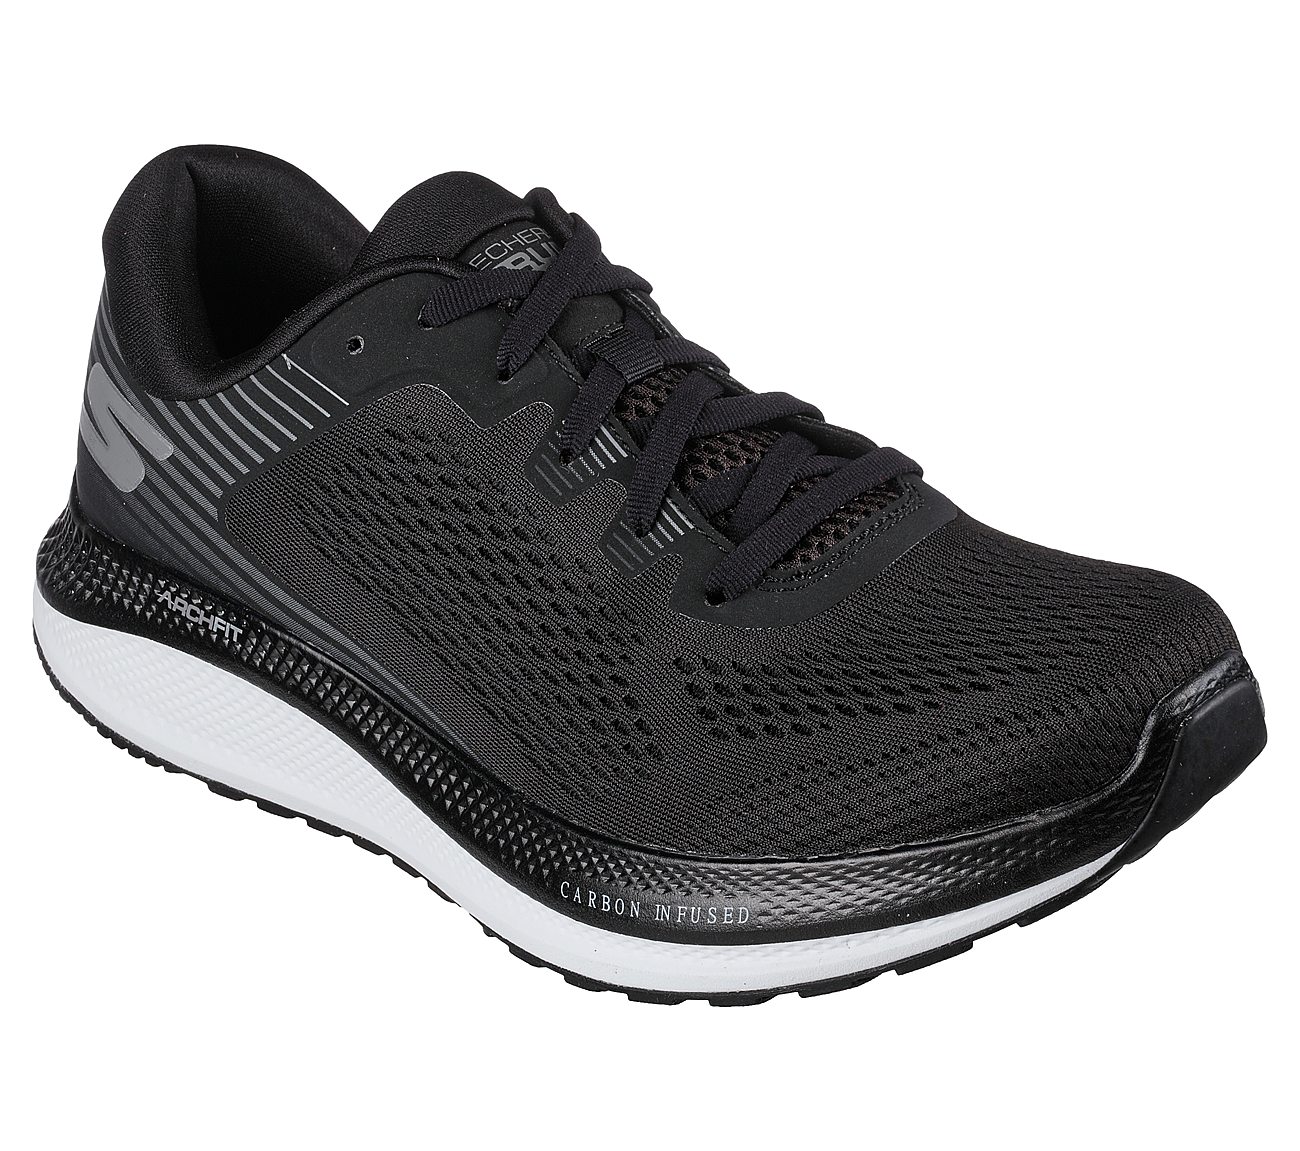 GO RUN PERSISTENCE,  Footwear Lateral View